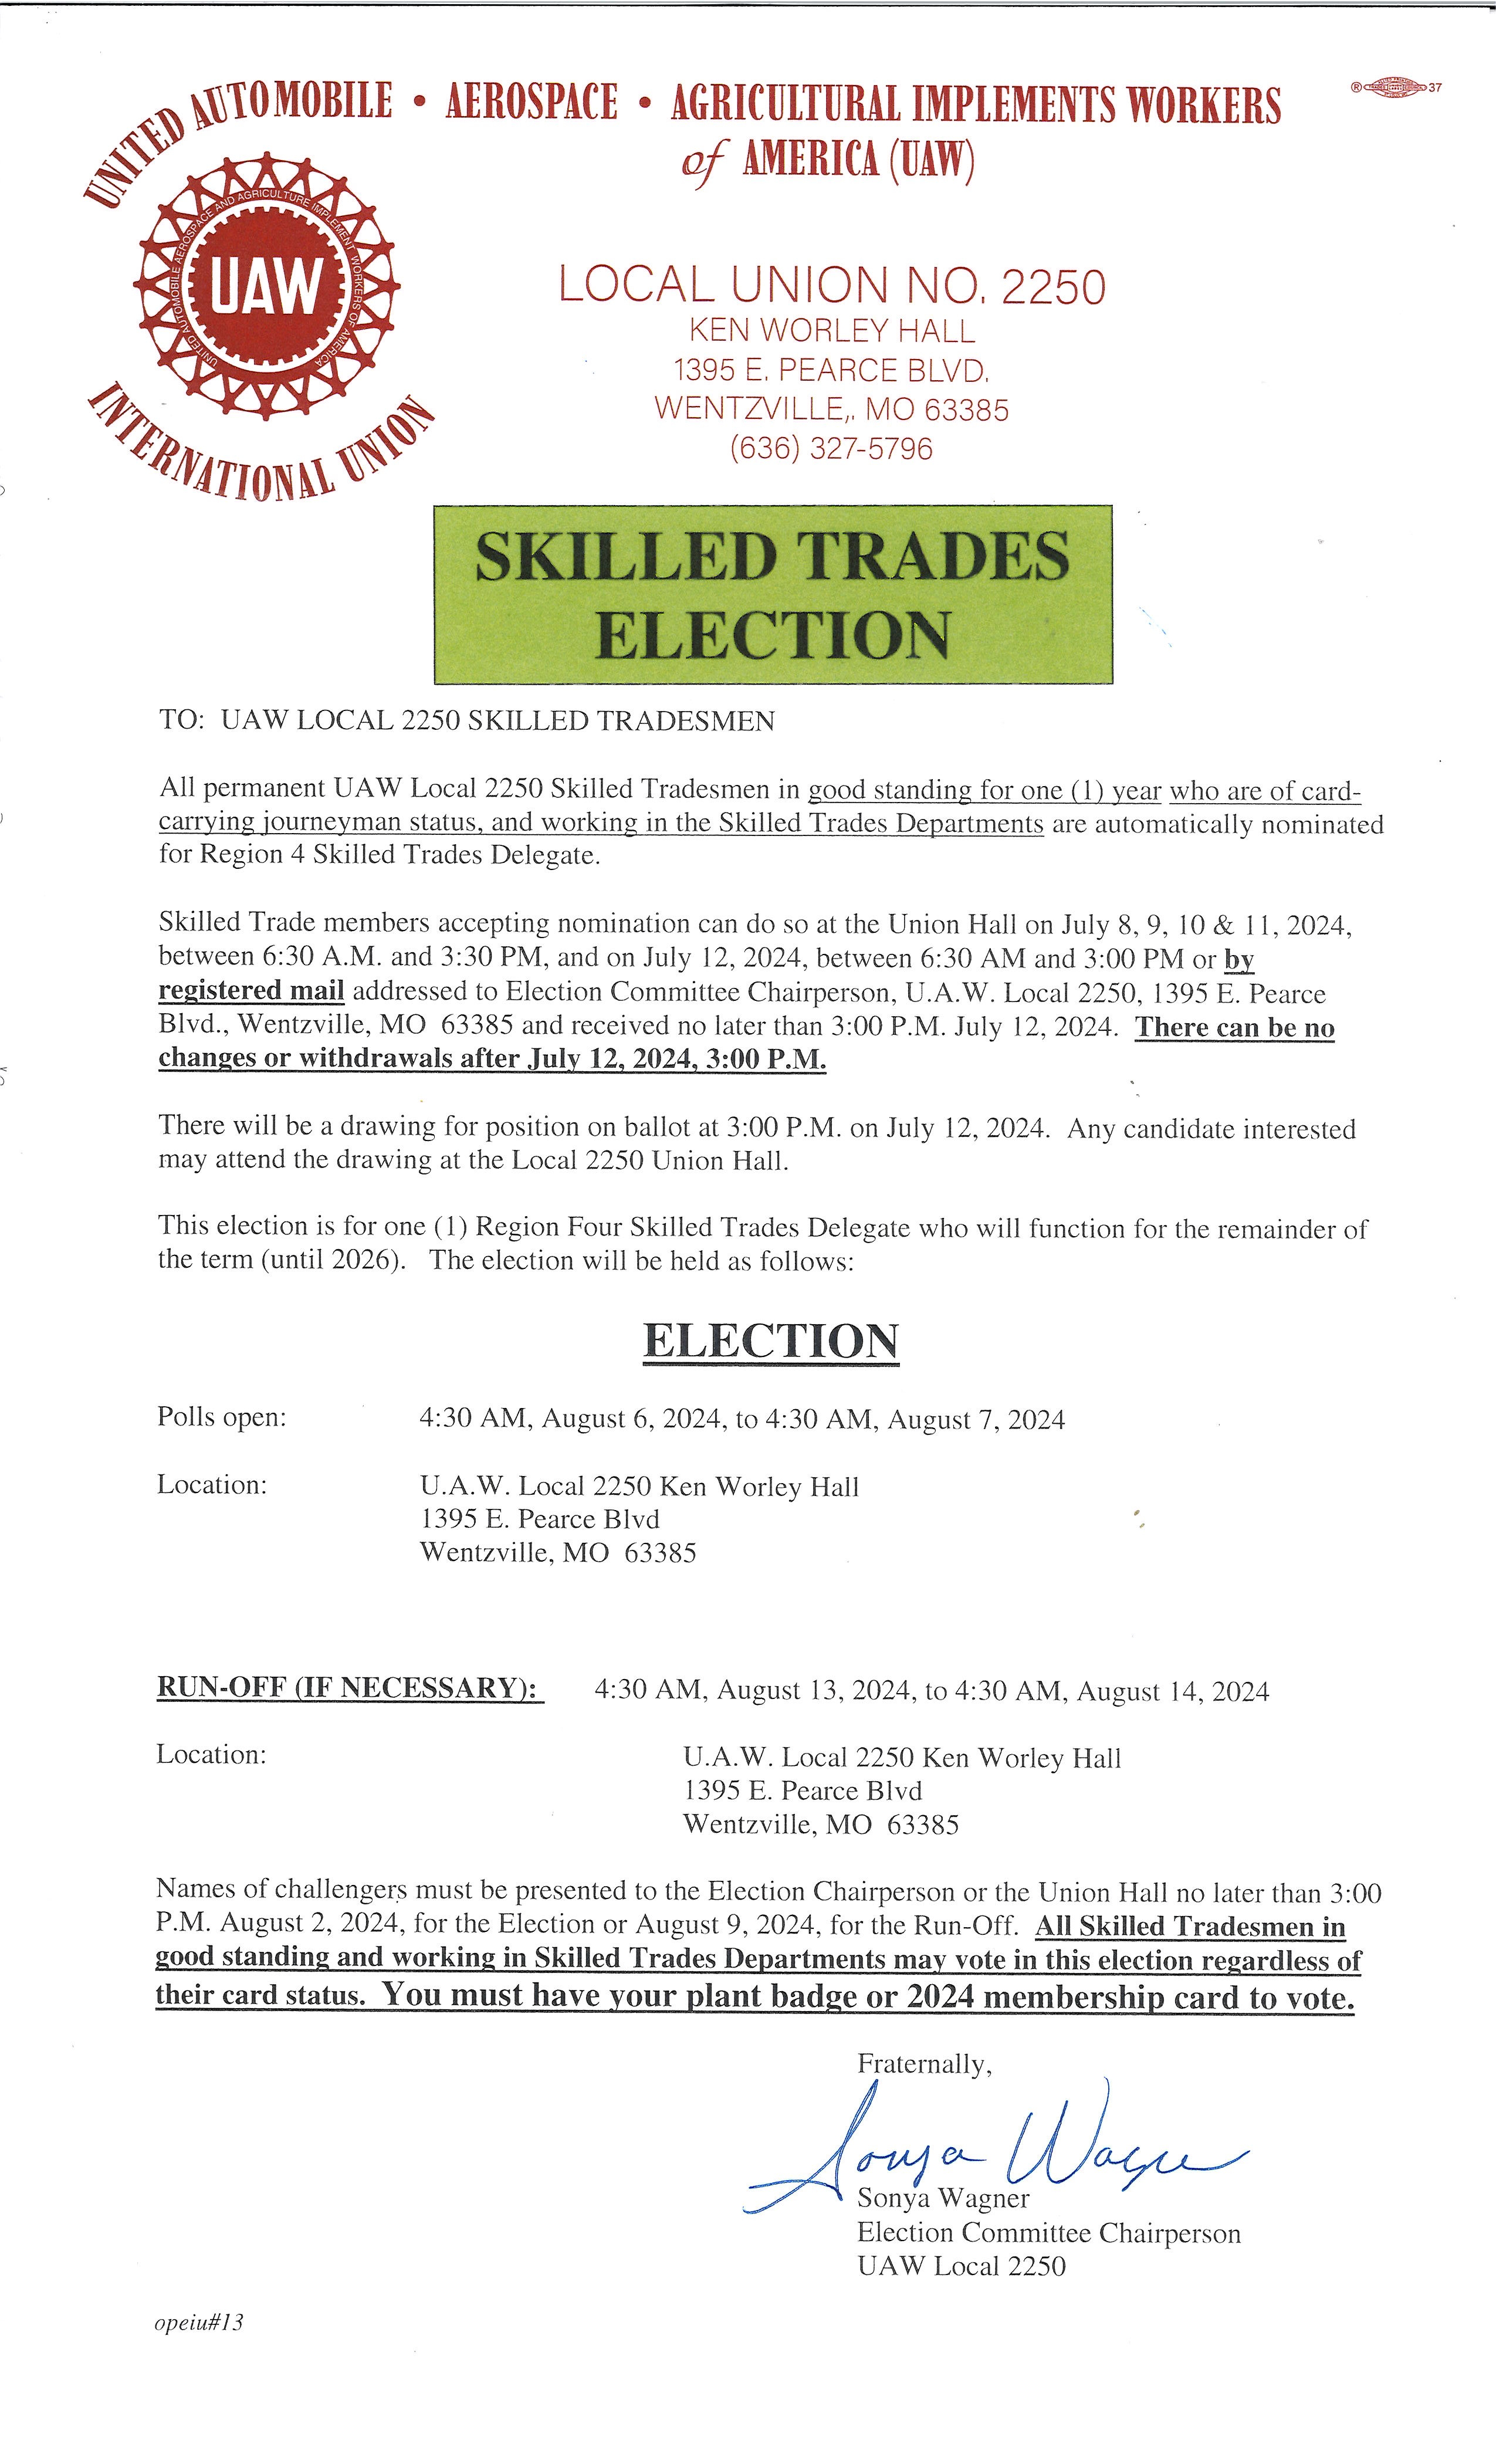 Skilled Trades Election Notice